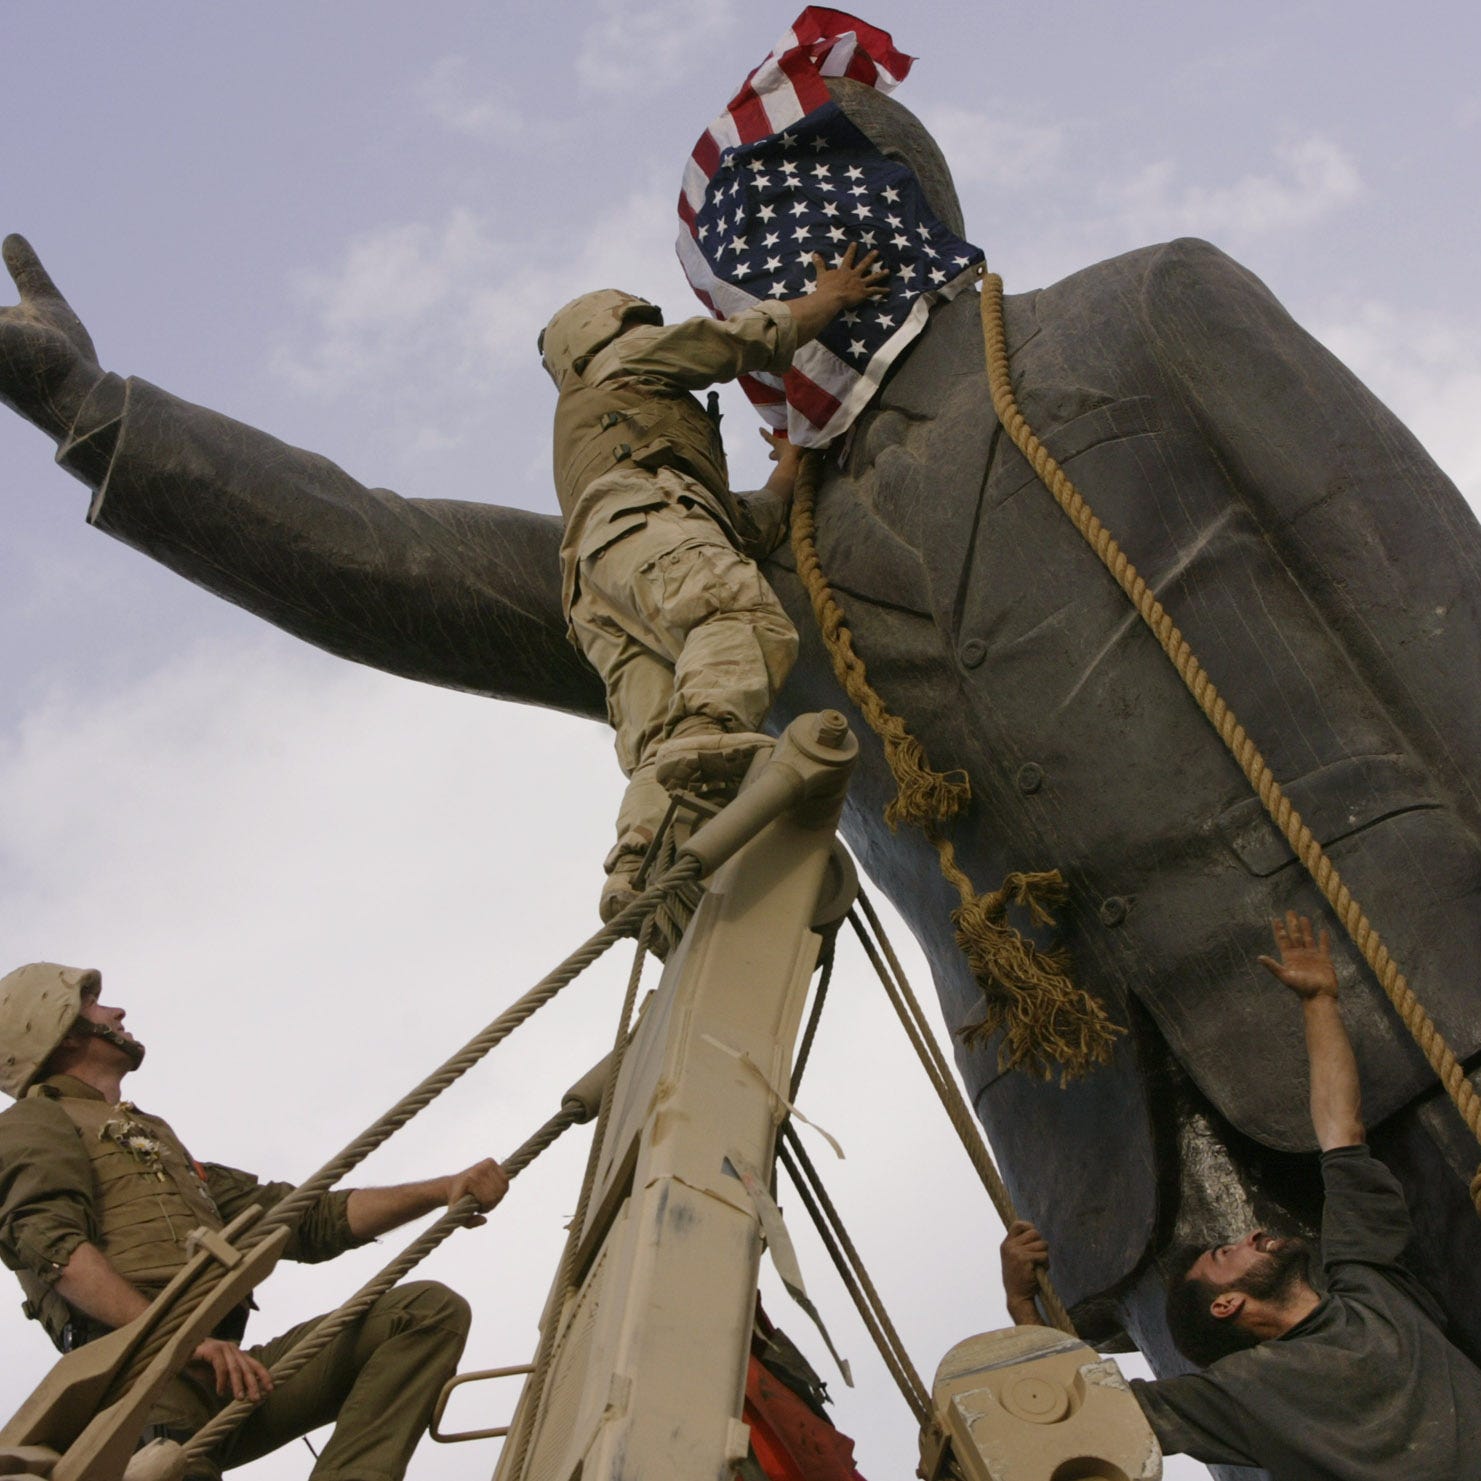 In this file photo taken Wednesday, April 9, 2003, an Iraqi man, bottom right, watches Cpl. Edward Chin of the 3rd Battalion, 4th Marines Regiment, cover the face of a statue of Saddam Hussein with an American flag before toppling the statue in downtown in Baghdad, Iraq.